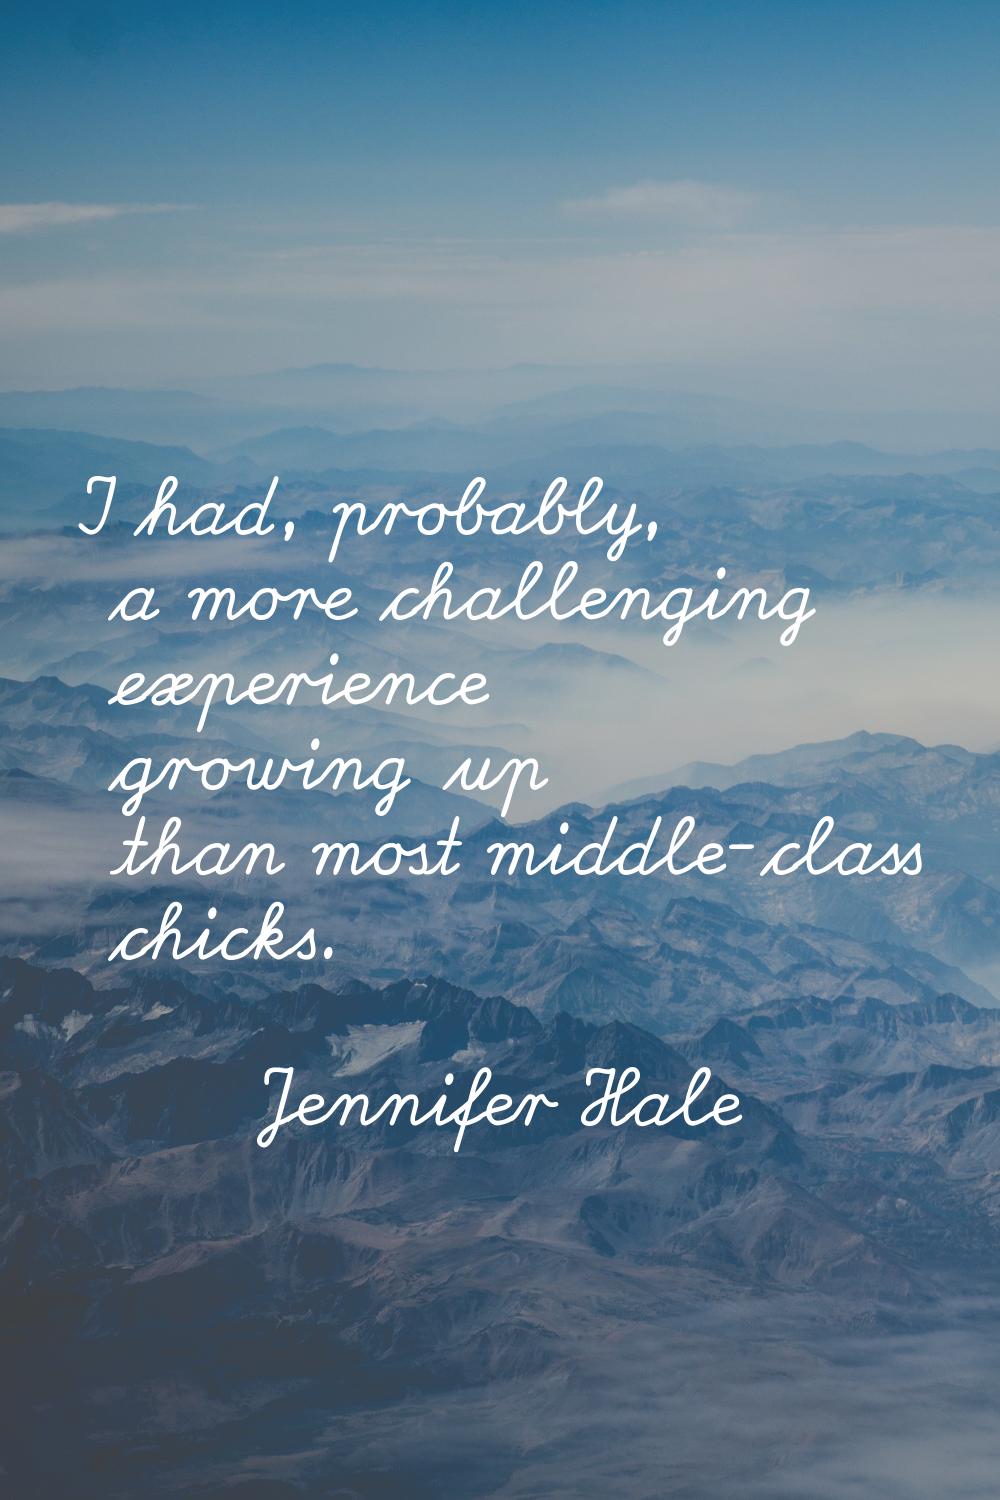 I had, probably, a more challenging experience growing up than most middle-class chicks.